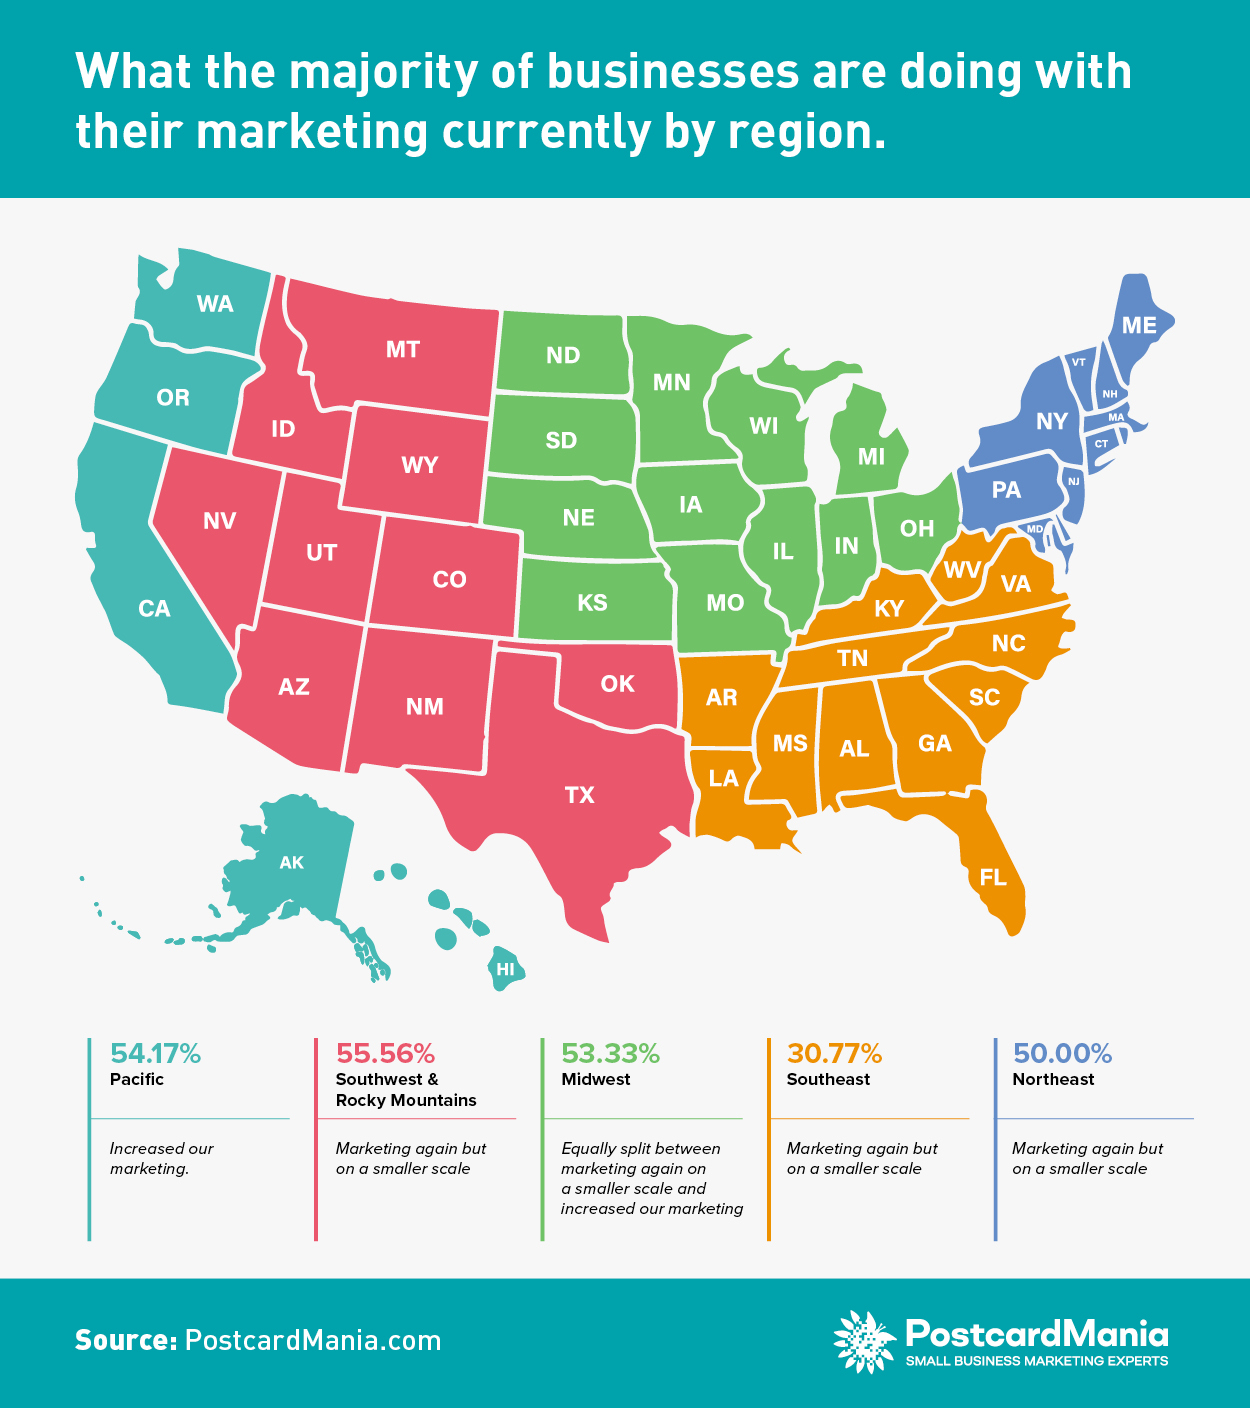 COVID Survey - What Businesses Are Currently Doing With Marketing by Region